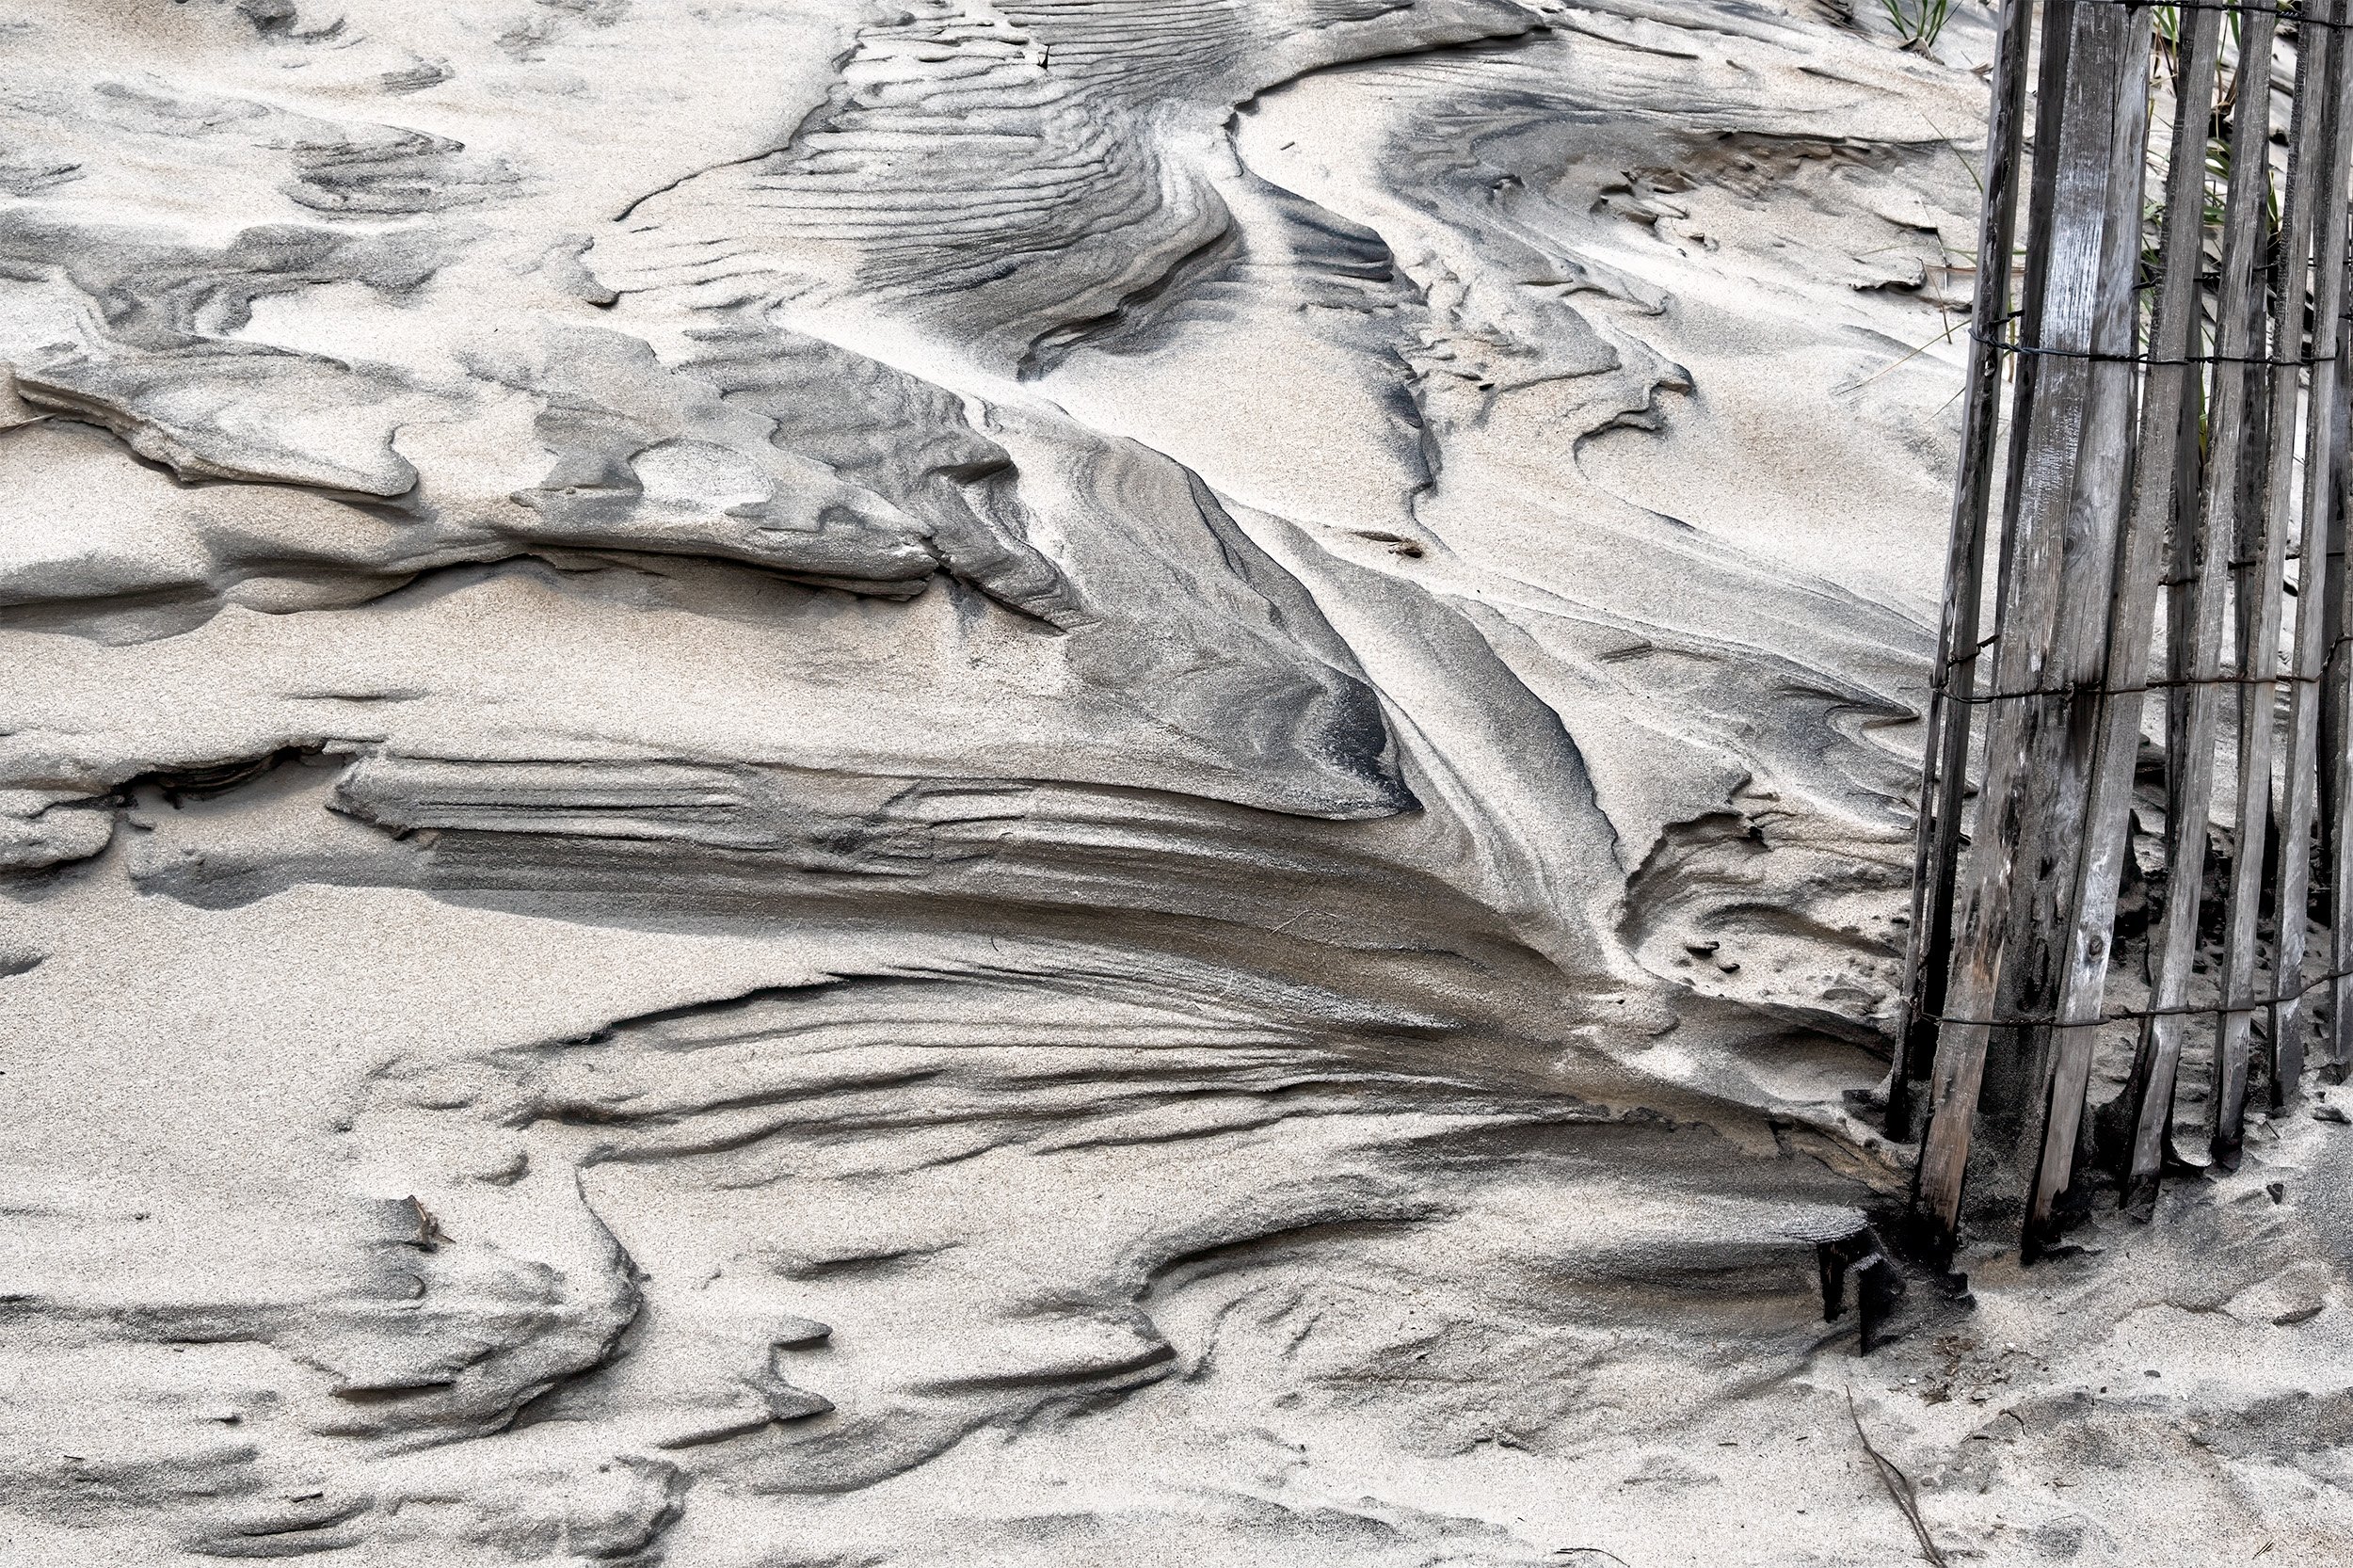 Wind sculpted sand after a storm at Bethany Beach 